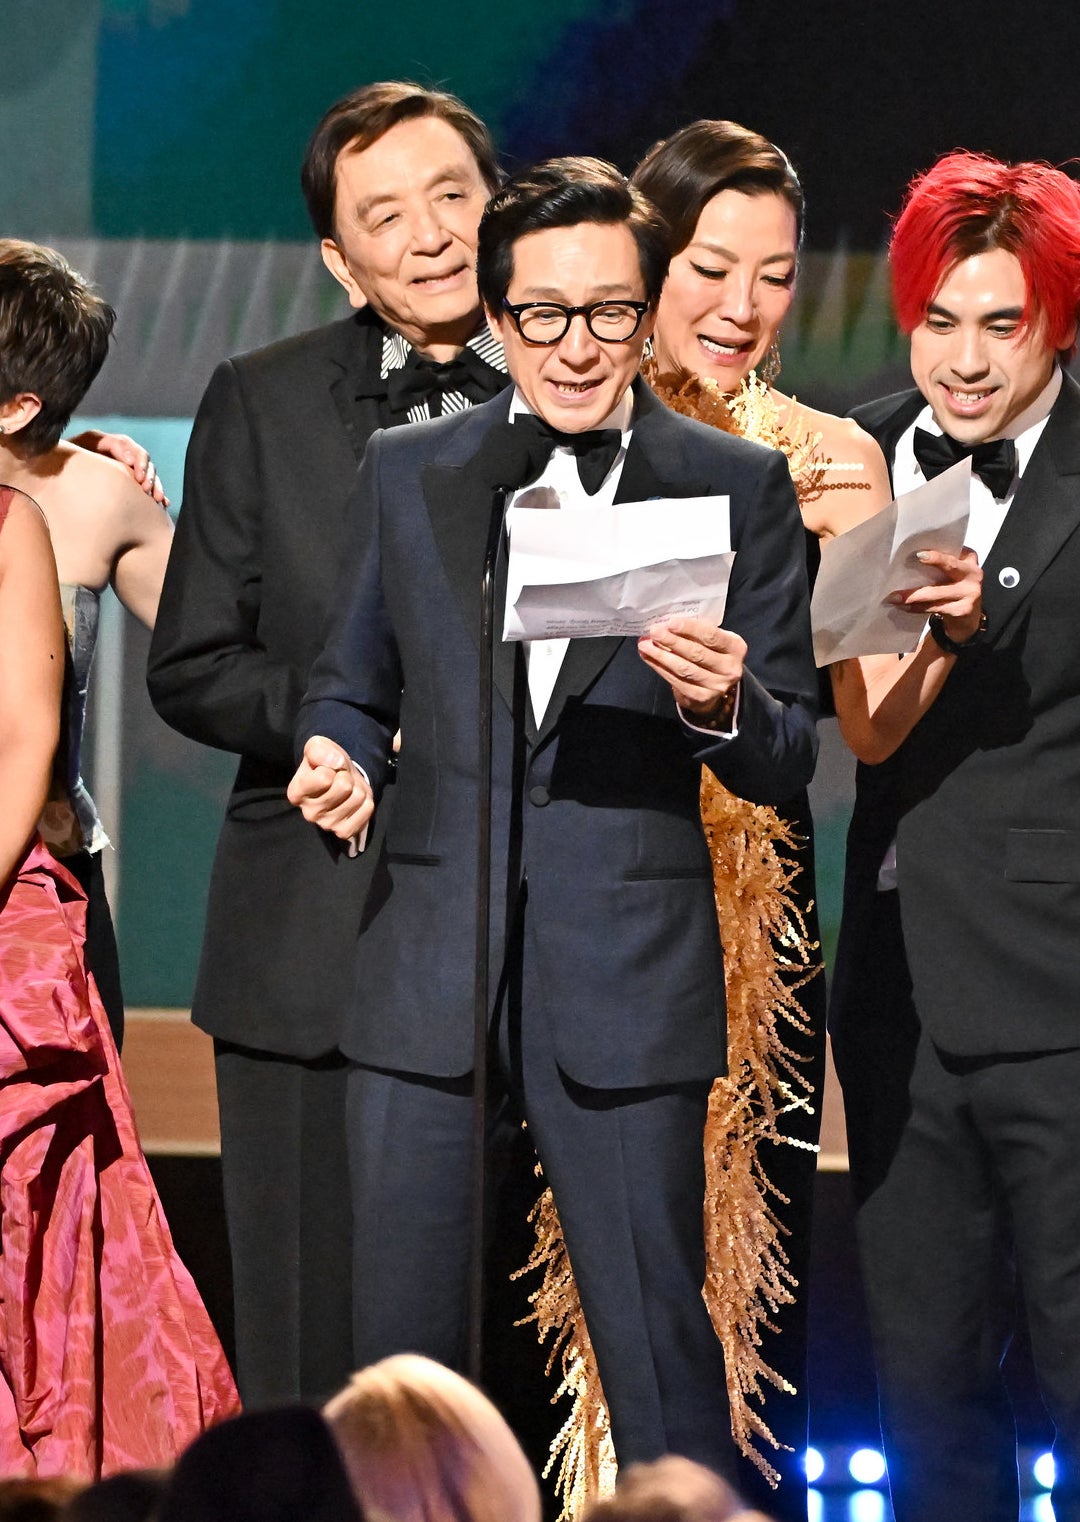 Ke Huy Quan accepts the award for Ensemble Cast in a Motion Picture for Everything Everywhere All At Once